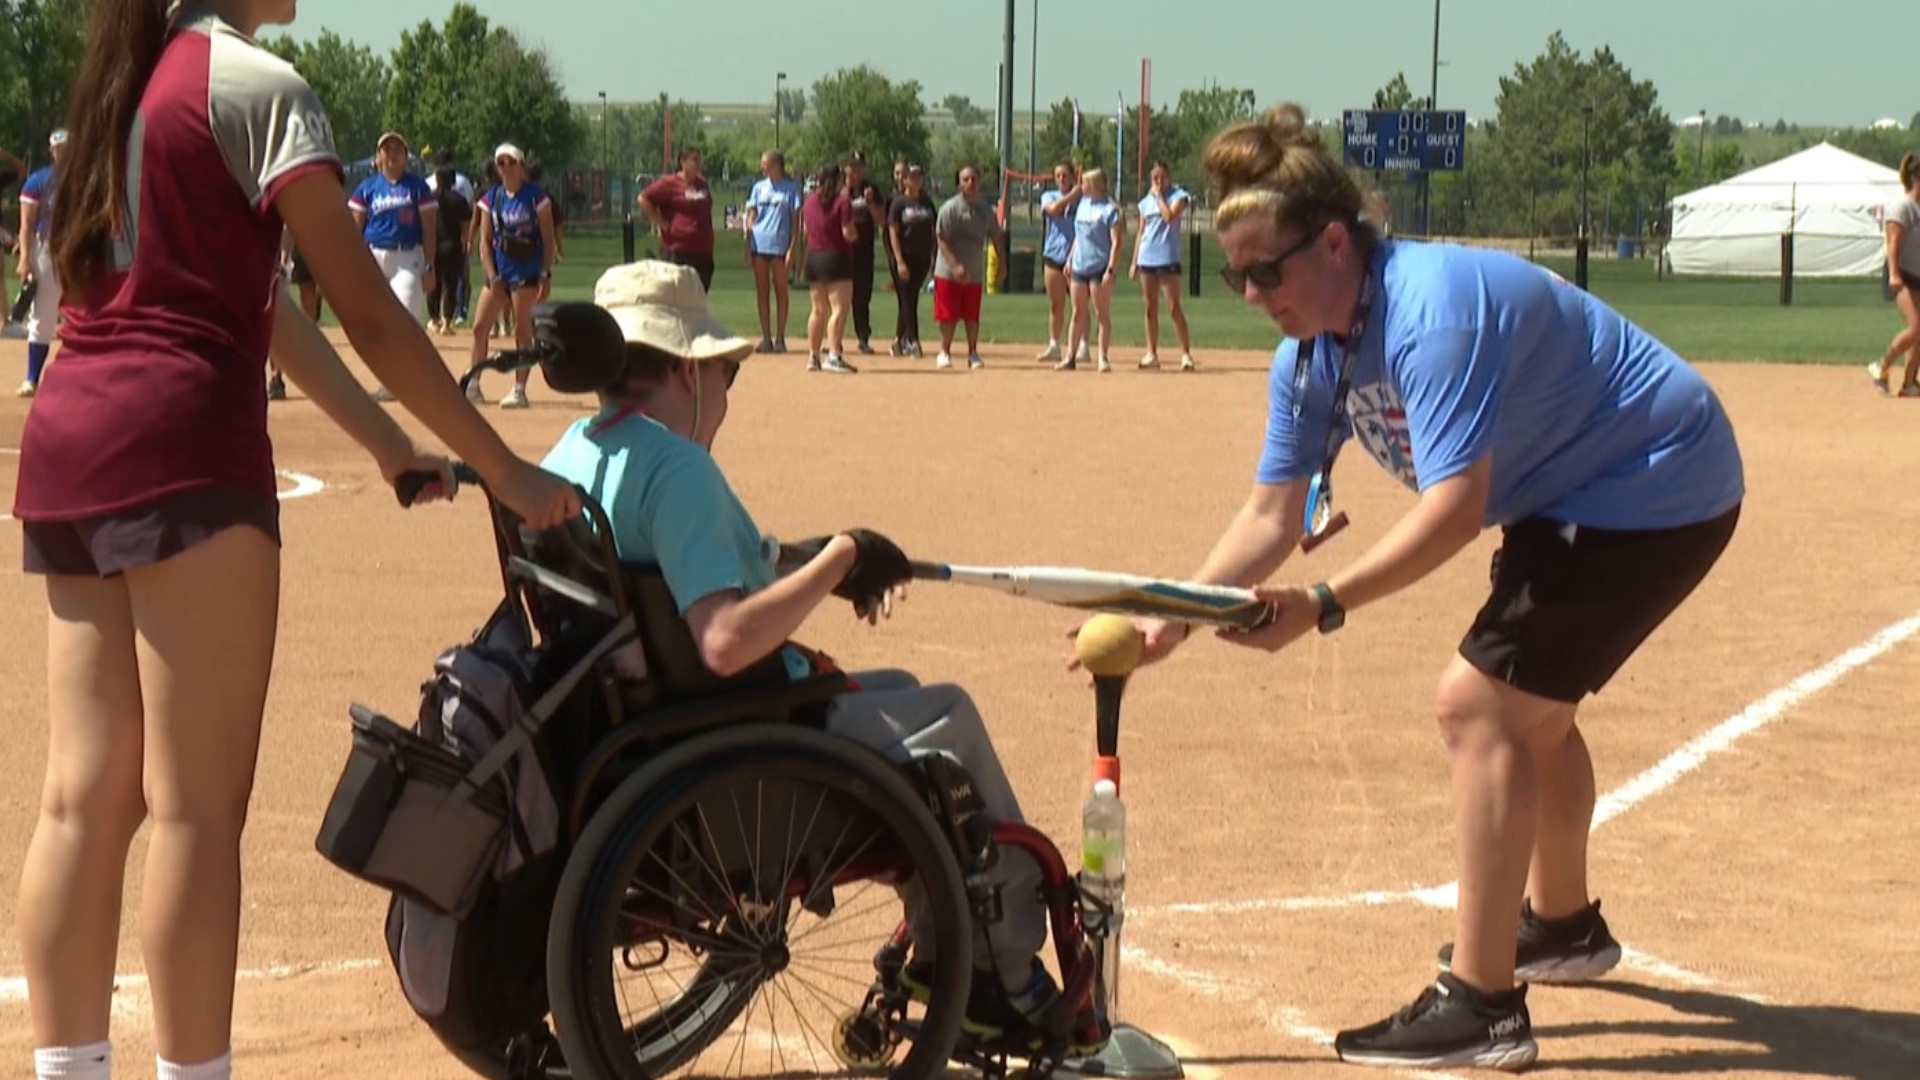 The Beautiful Lives Project proved to be the biggest thing happening on the diamonds at a local softball tournament.